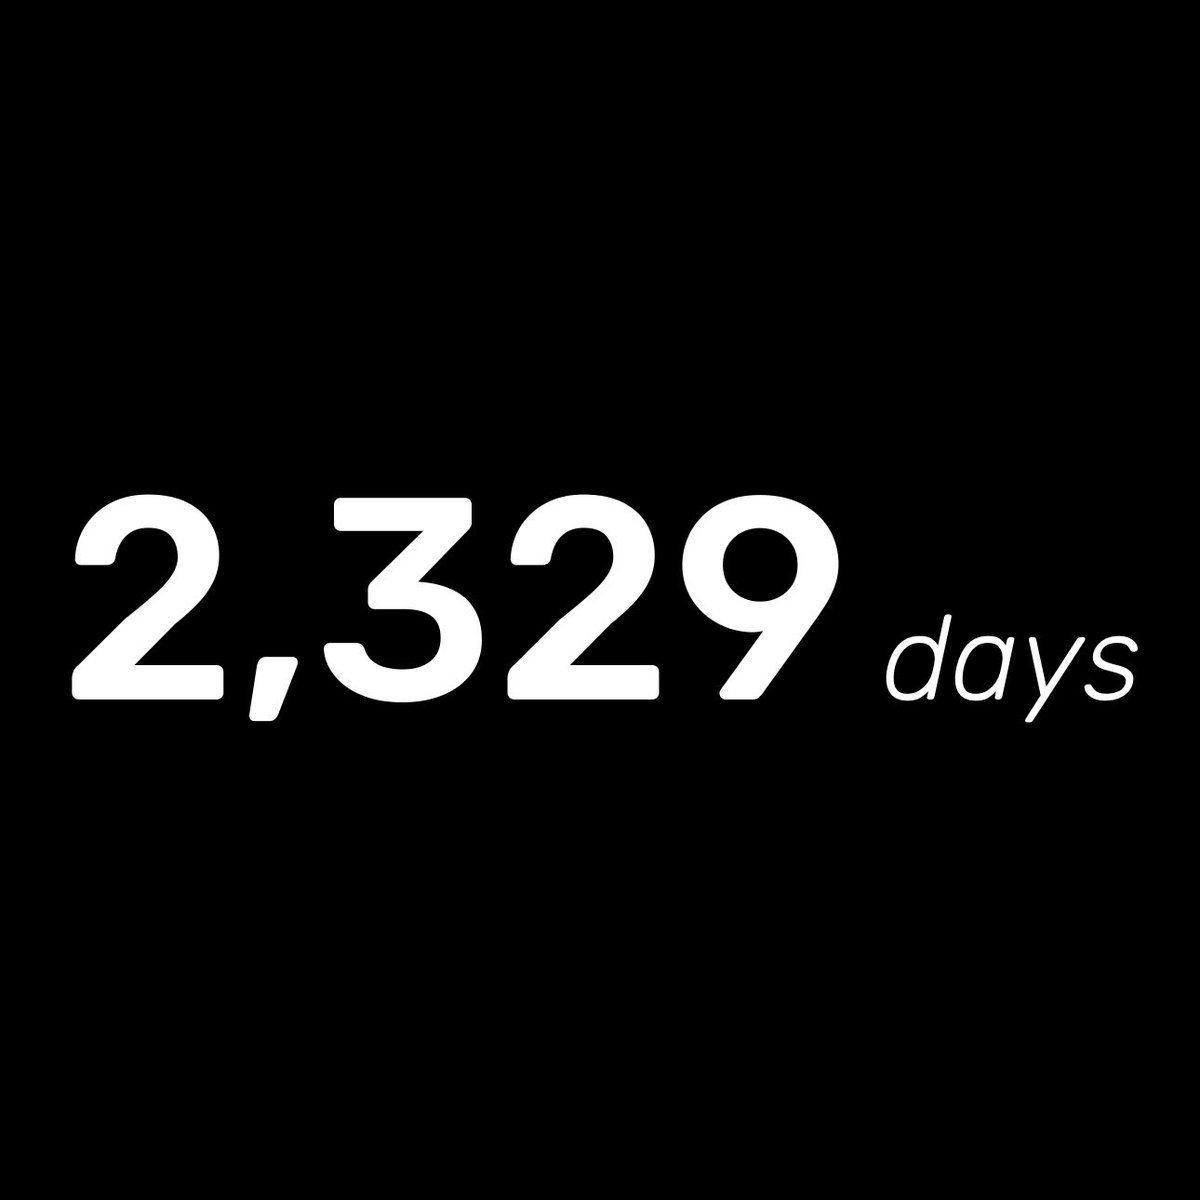 How many days has Colin Kaepernick been denied work in the NFL? We’re counting. https://t.co/H3vJlOMcPq https://t.co/bwx0PjvuyQ